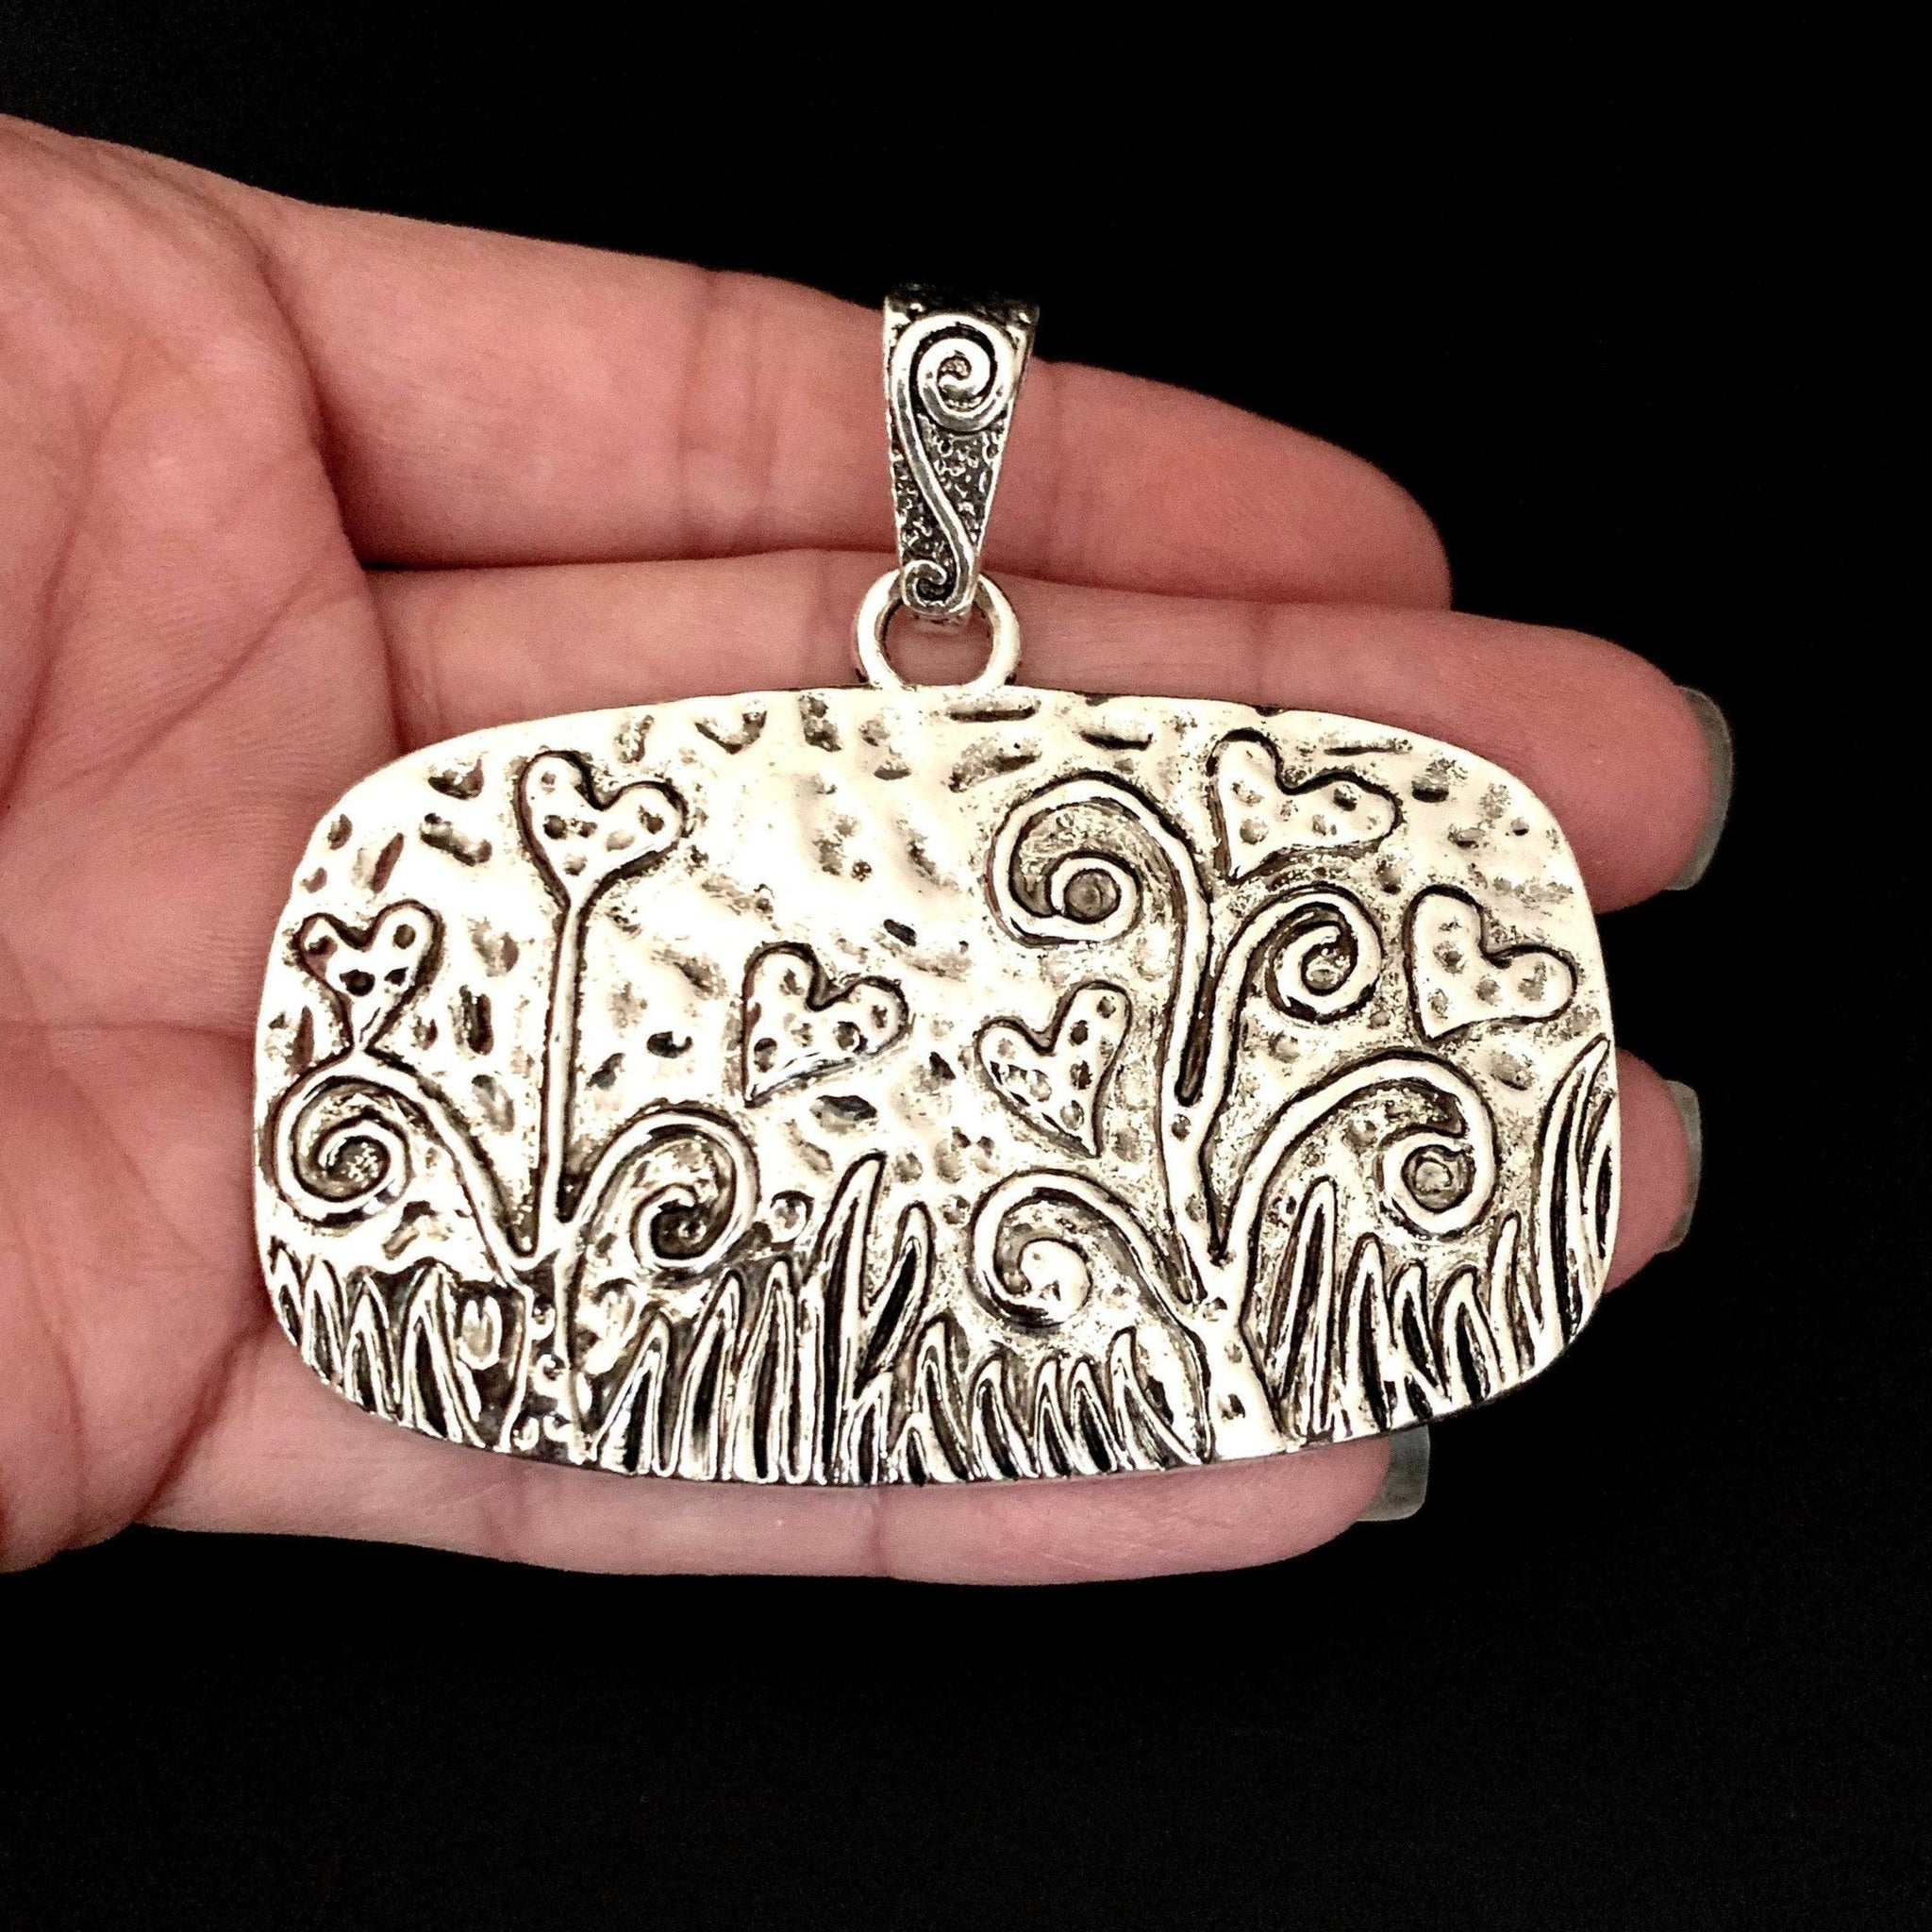 Hammered Flower/Heart Pendant - Nature Scene Pendant with Hearts - Antique Silver